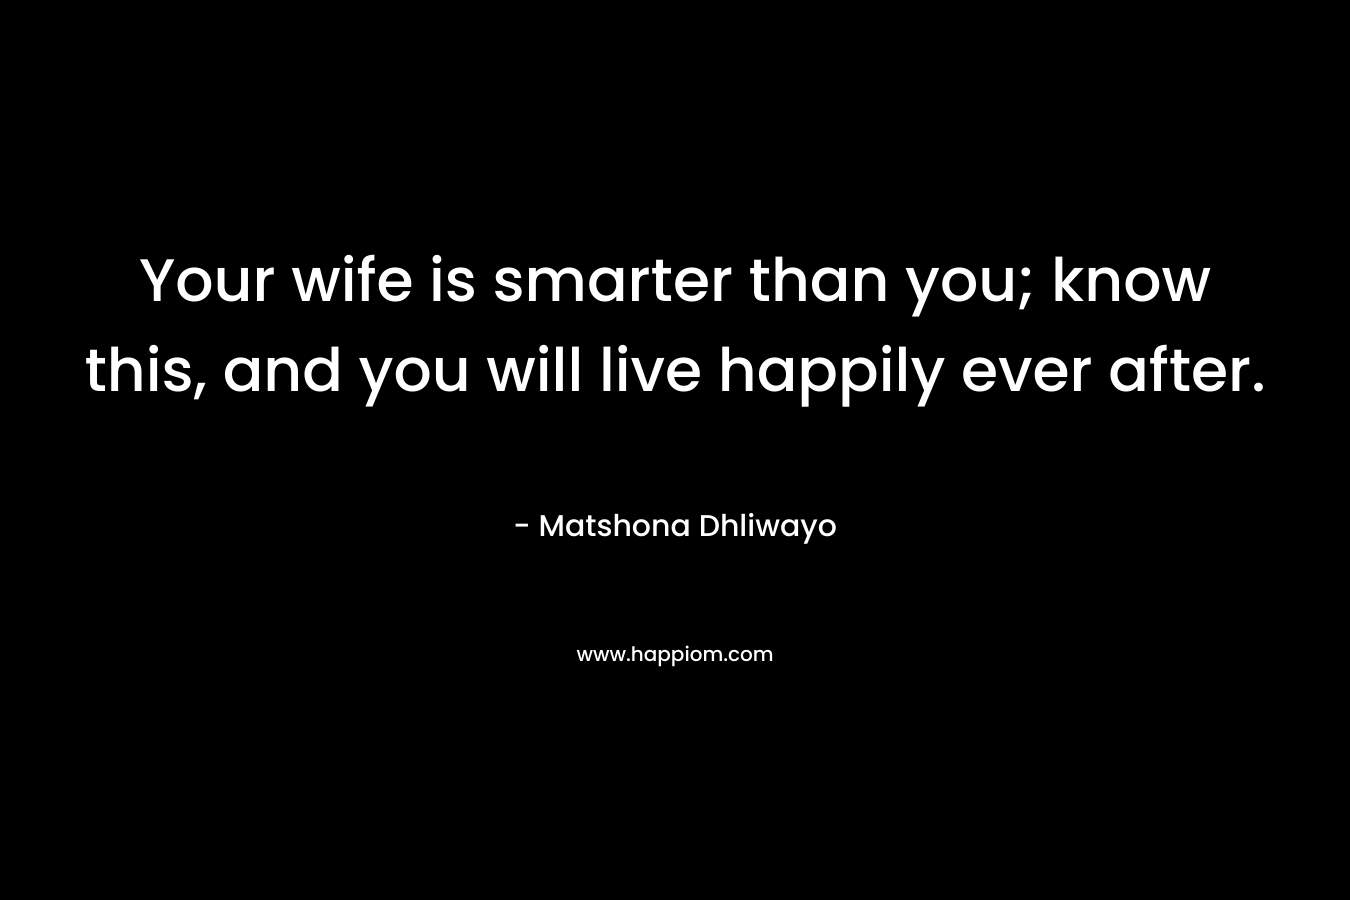 Your wife is smarter than you; know this, and you will live happily ever after.